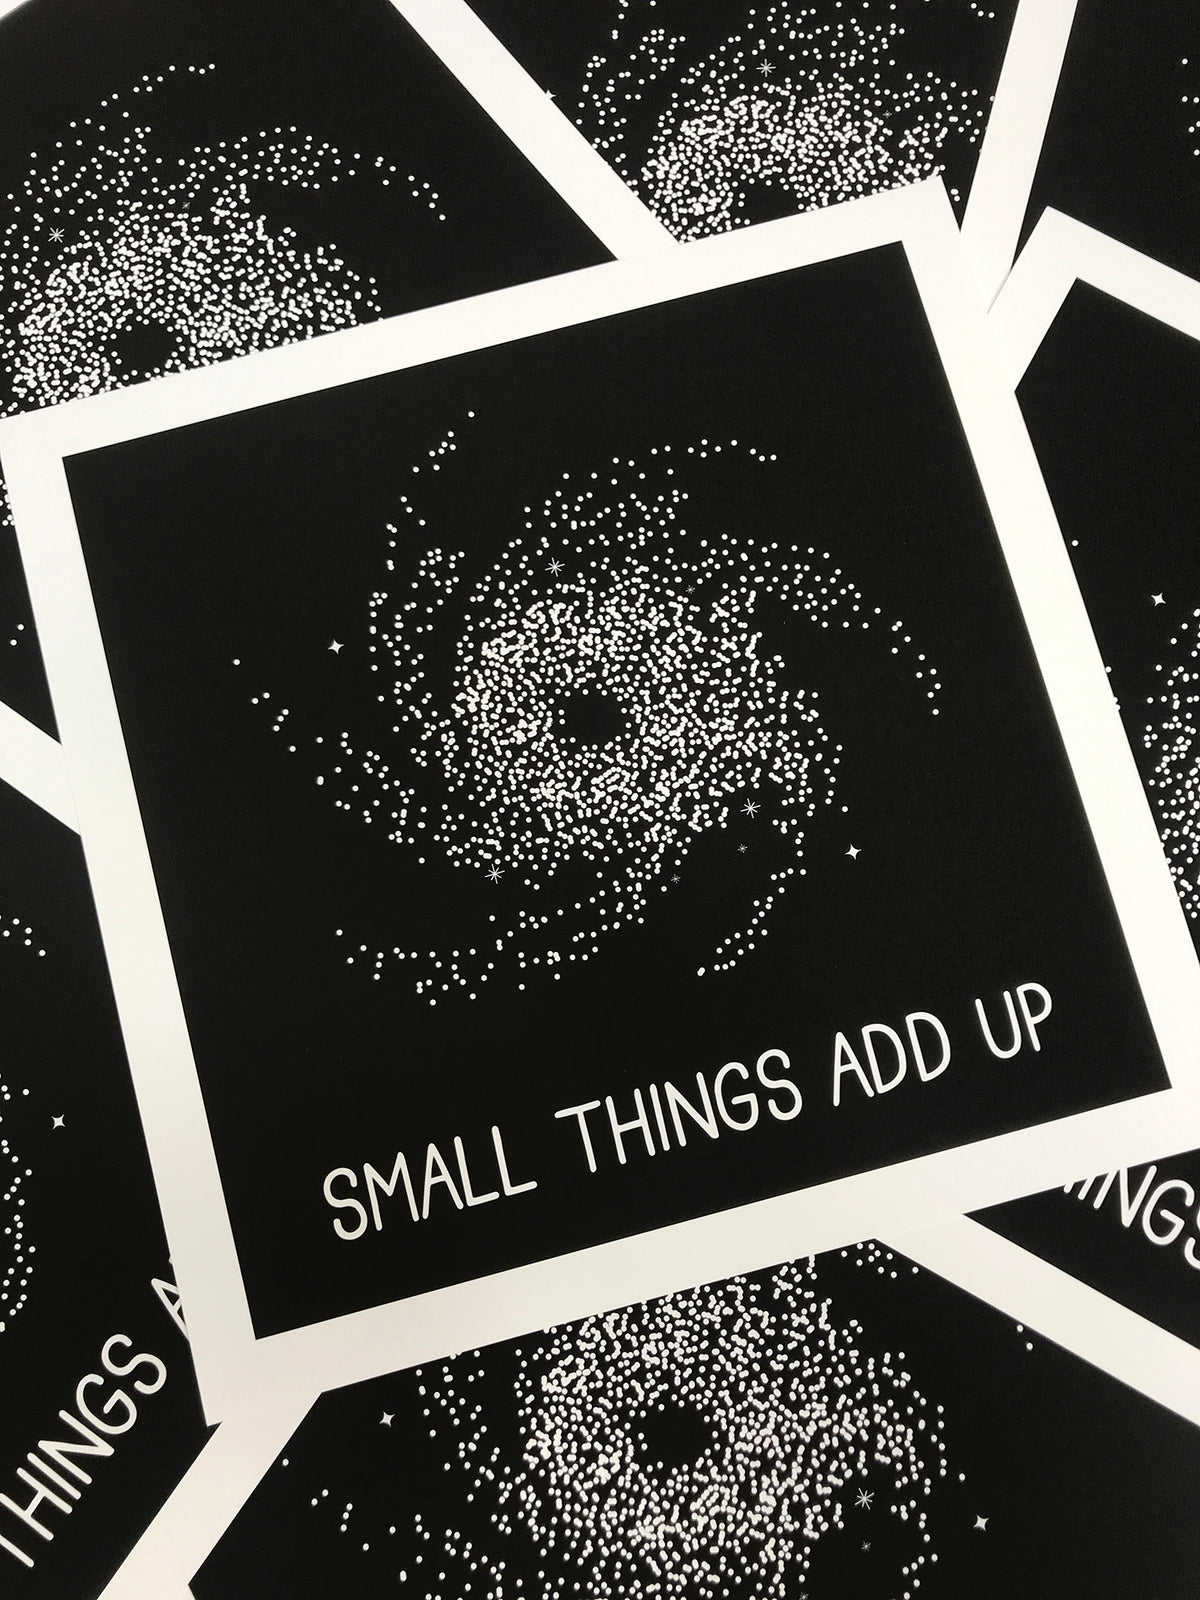 Matthew Zaremba &quot;Small Things Add Up&quot; - Archival Print, Limited Edition of 12 - 17 x 17&quot;